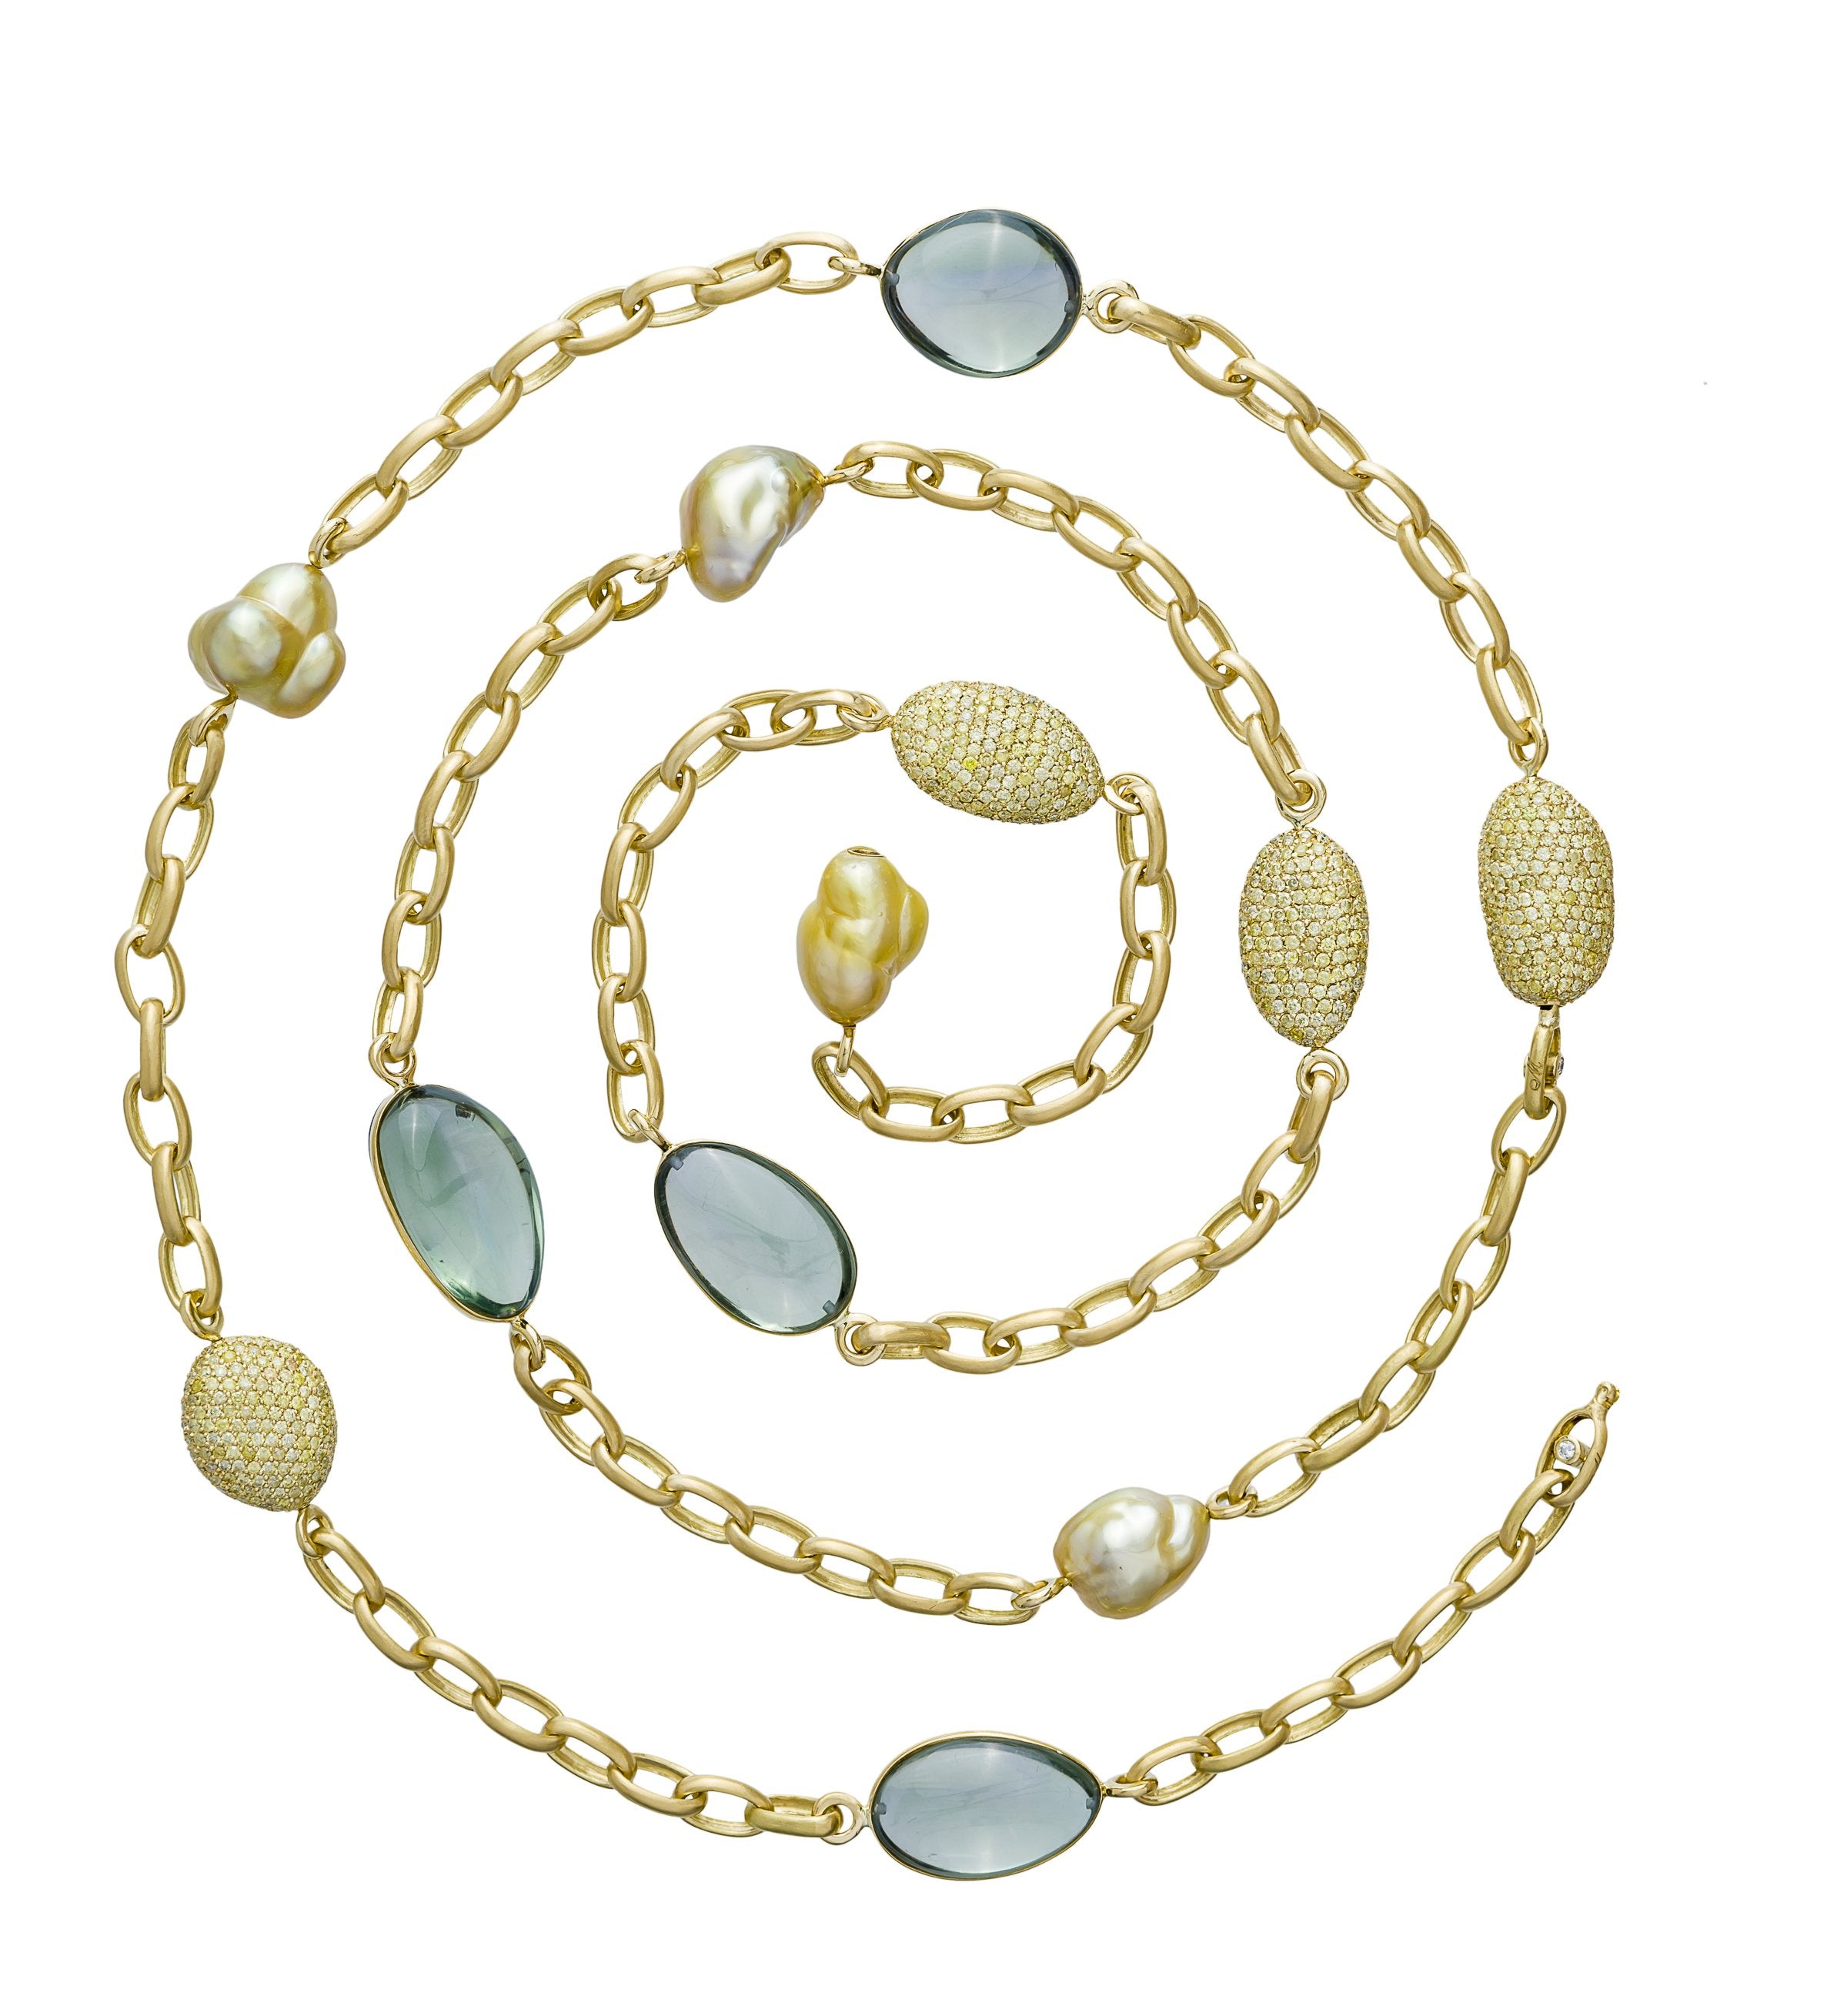 Gold chain necklace with golden pearls, green amethyst pebbles and diamond pave pebbles, crafted in 18 karat yellow gold chain.